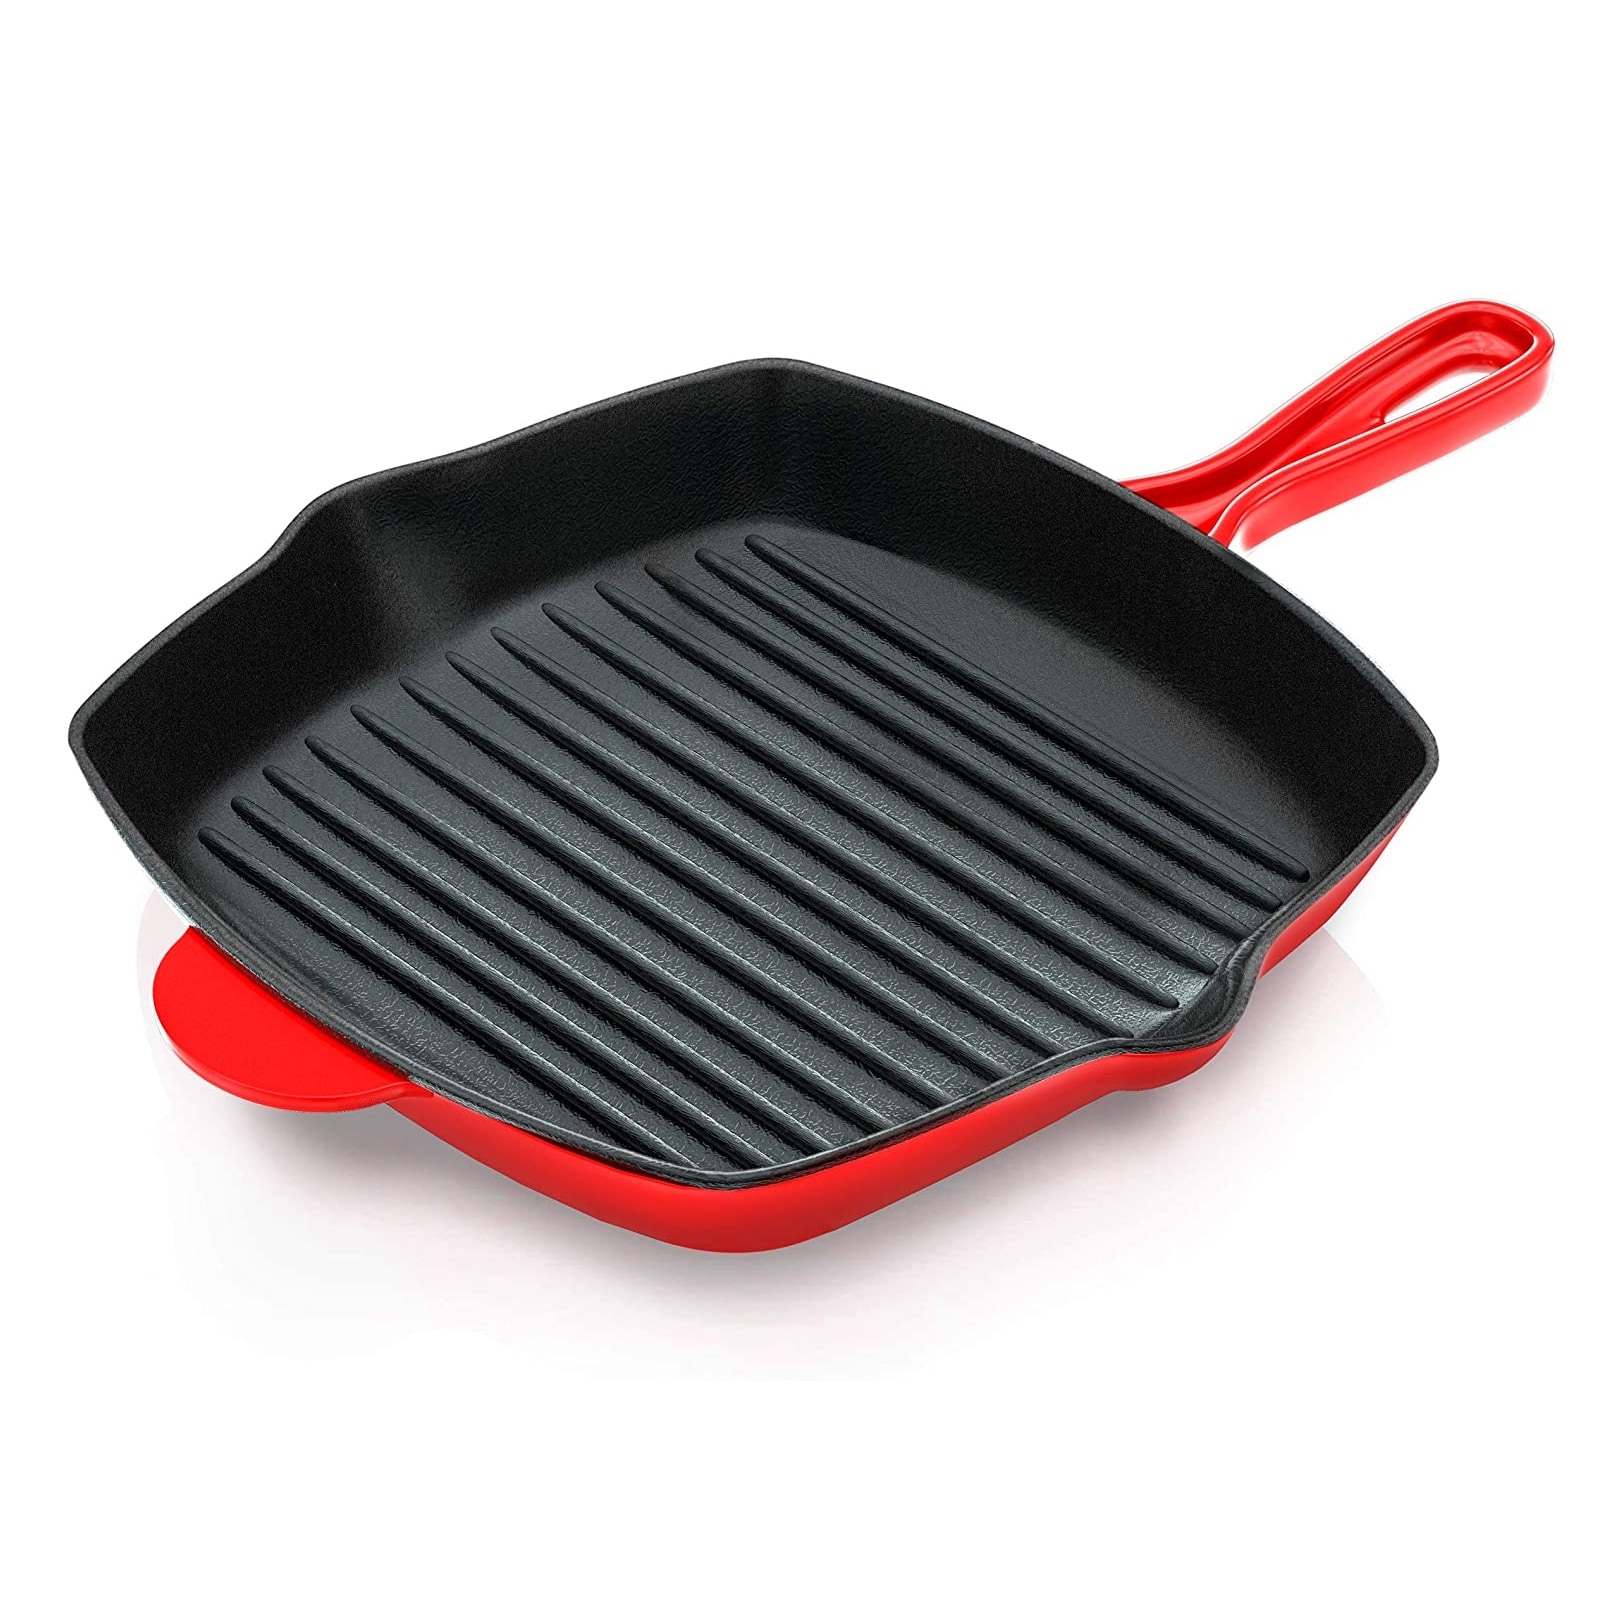 NutriChef 11 Inch Square Cast Iron Skillet with Porcelain Enamel Coating,  Red Bed Bath  Beyond 36045224